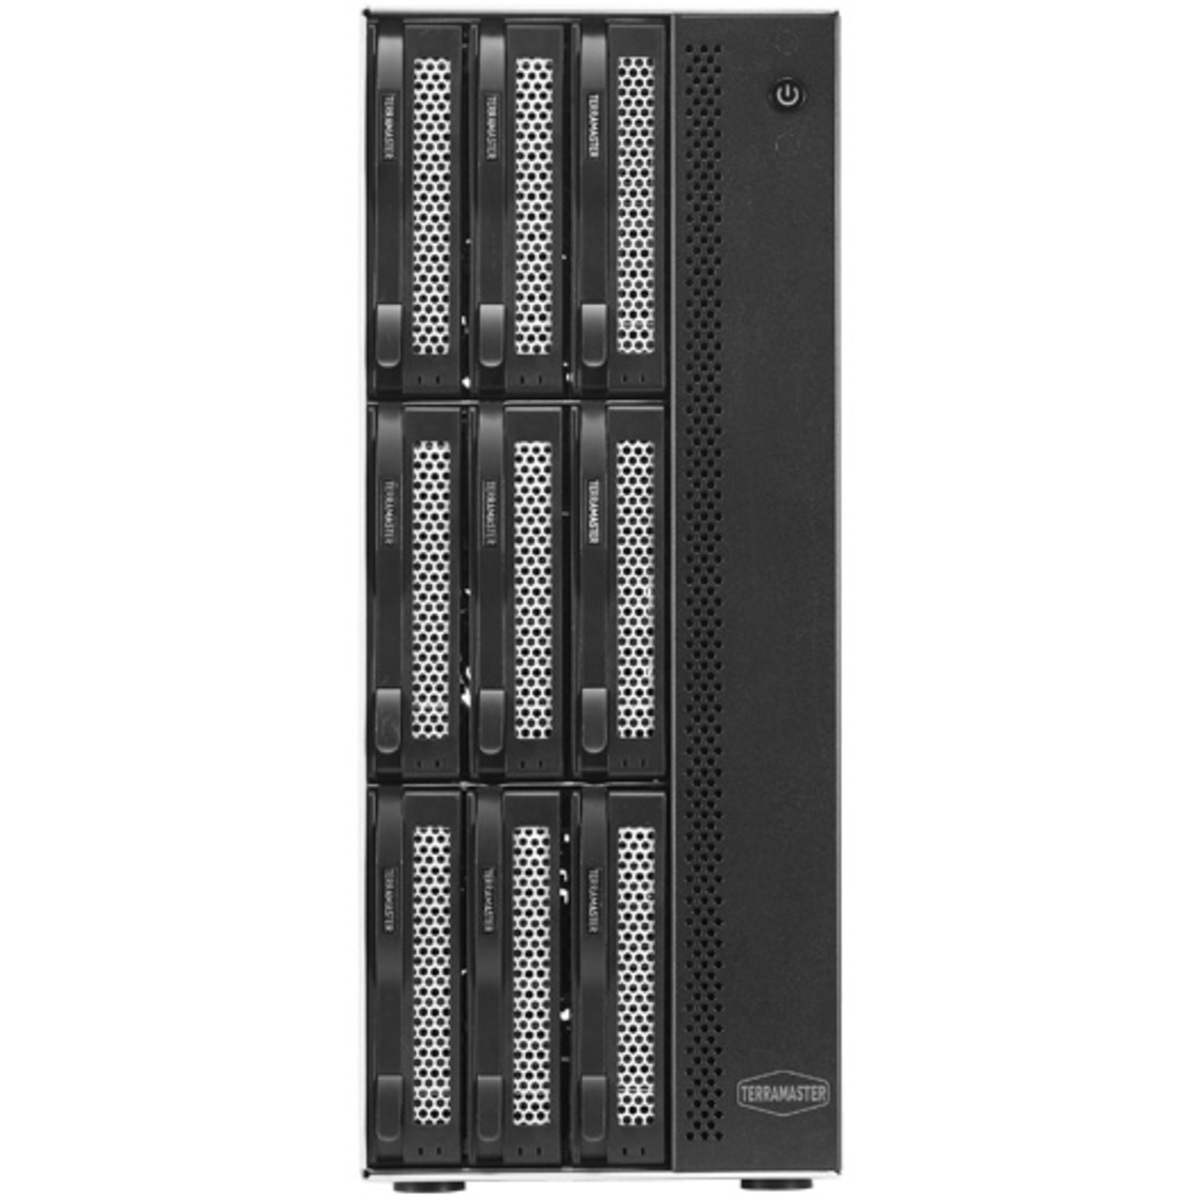 buy TerraMaster T9-423 Desktop NAS - Network Attached Storage Device Burn-In Tested Configurations - nas headquarters buy network attached storage server device das new raid-5 free shipping usa T9-423